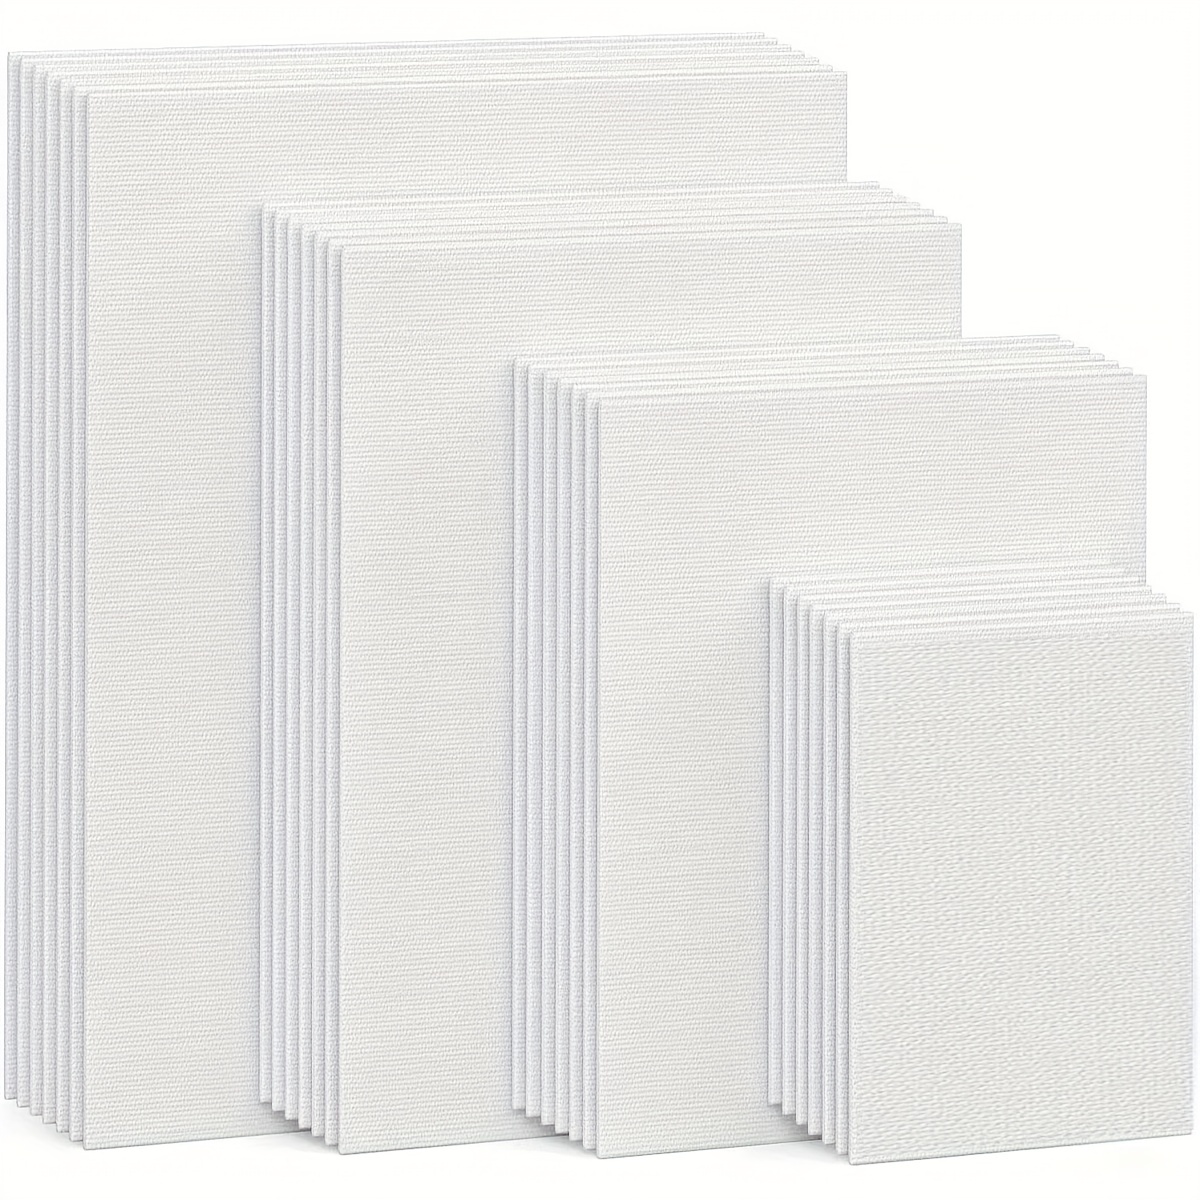 PHOENIX Painting Canvas Panels 12x12 Inch, 24 Bulk Pack - 8 Oz Triple  Primed 100% Cotton Acid Free Square Canvases for Painting, White Blank Flat